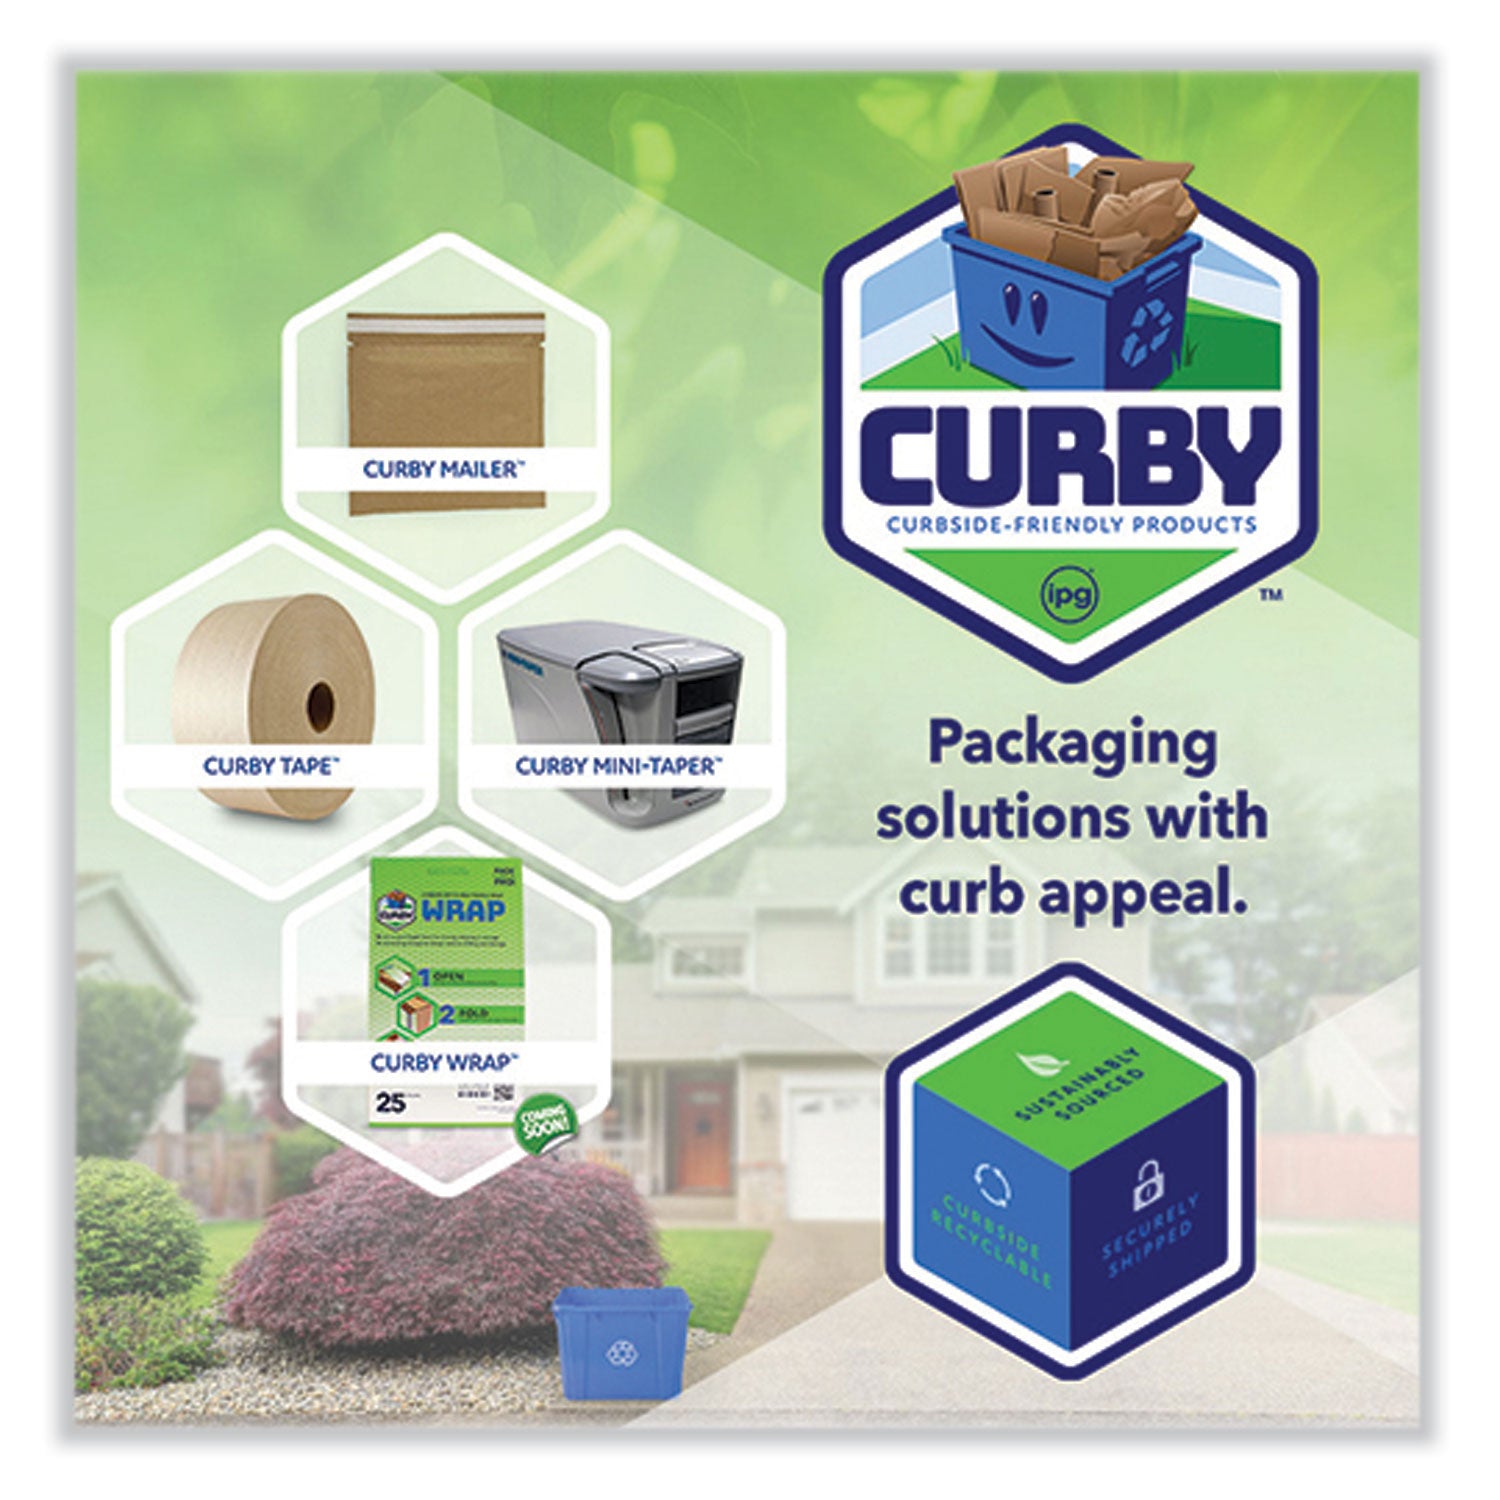 curby-mailer-self-sealing-recyclable-mailer-paper-padding-self-adhesive-#6-1338-x-185-30-carton_ipgcbml6c - 2